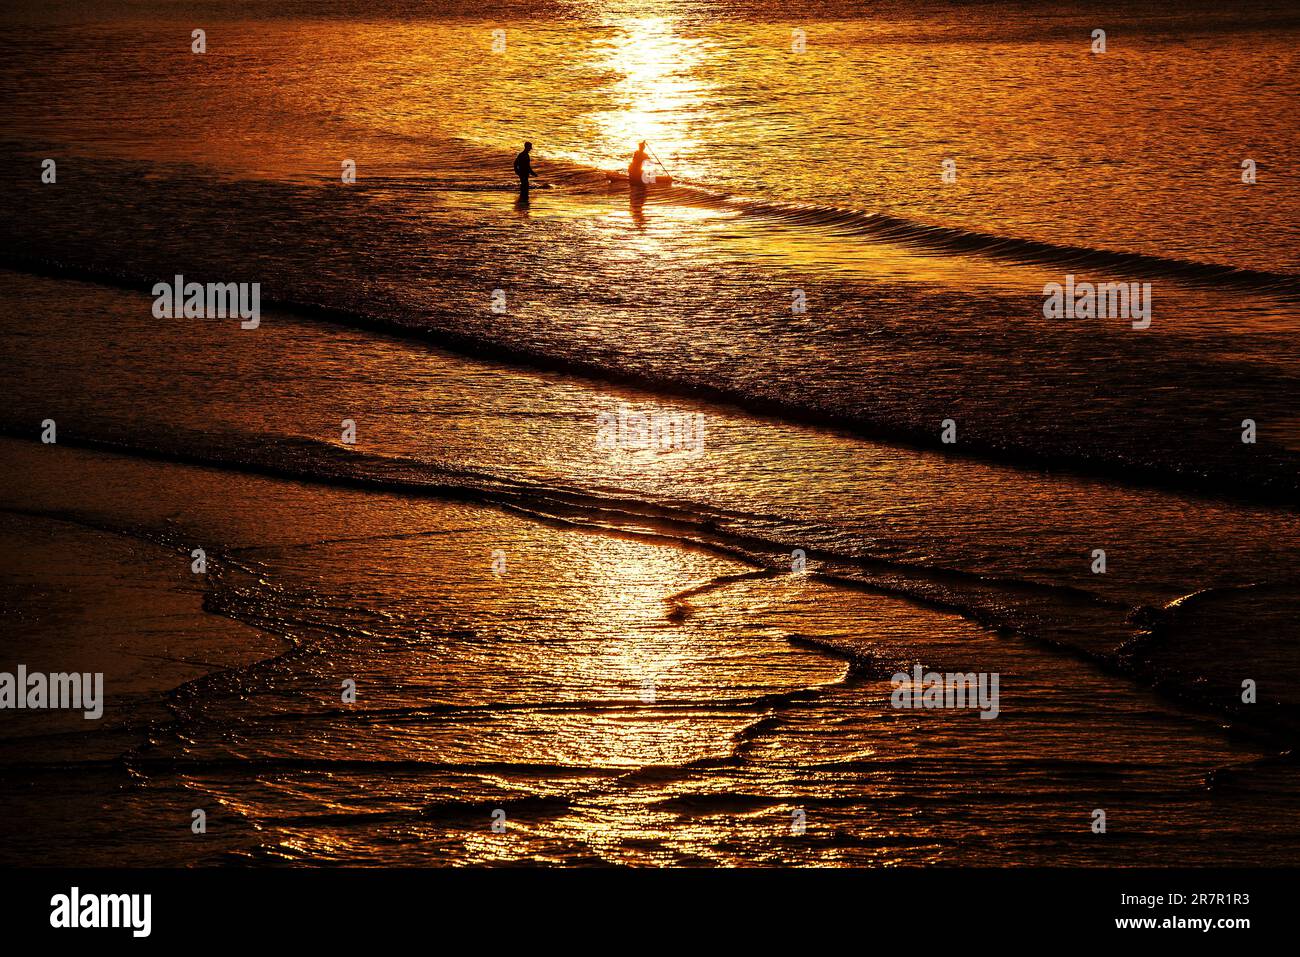 Scarborough, North Yorkshire, UK. 16th June 2023. Paddle boarders at sea at sunset at North Bay, Scarborough, North Yorkshire. Neil Squires/Alamy Live News Stock Photo